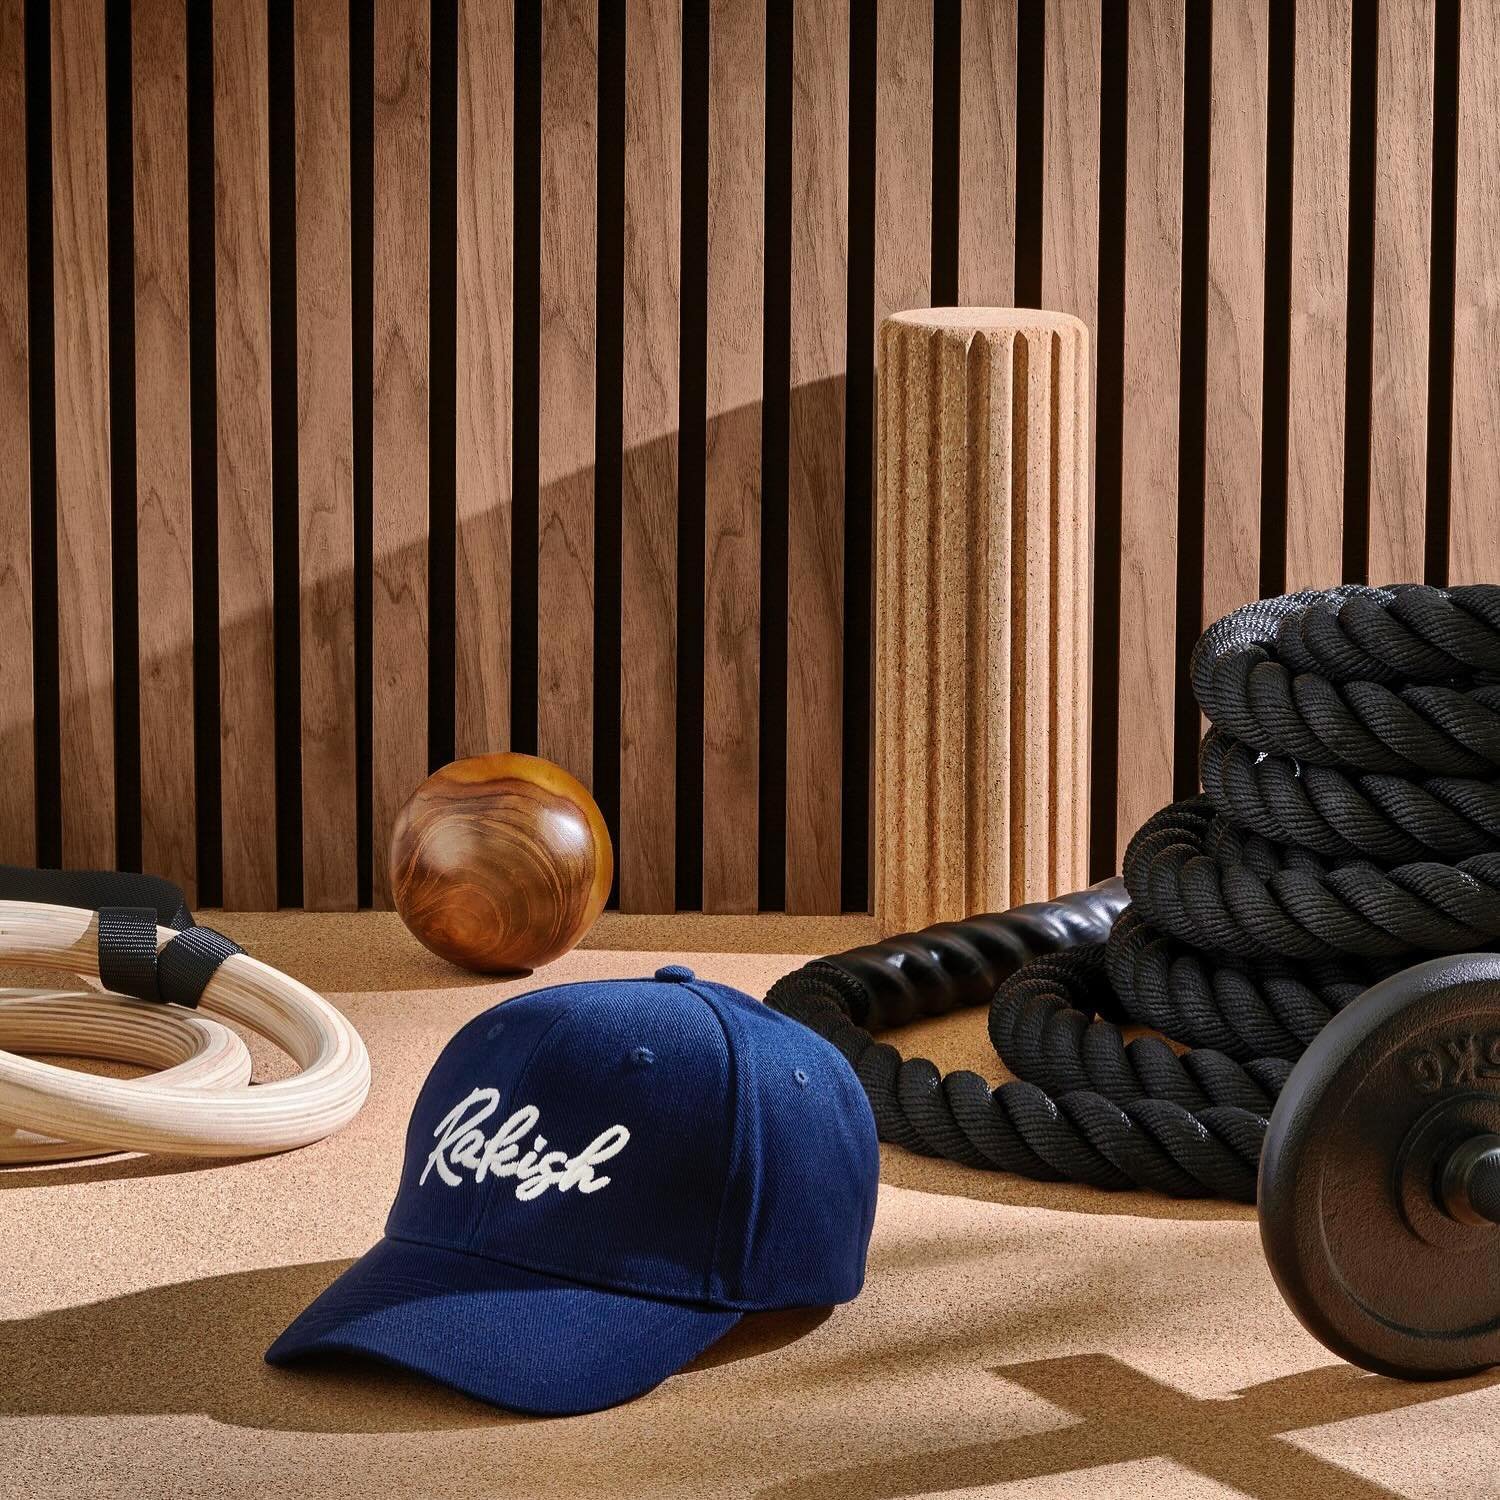 The only baseball cap you need this summer is from Rakish Gent Sporting Club 
Photography - @nick.dunne 
Retouching - @retouch_of_frost 
Still life &amp; props stylist - @charlottelhorwood 
Creative Direction - @tajhayer